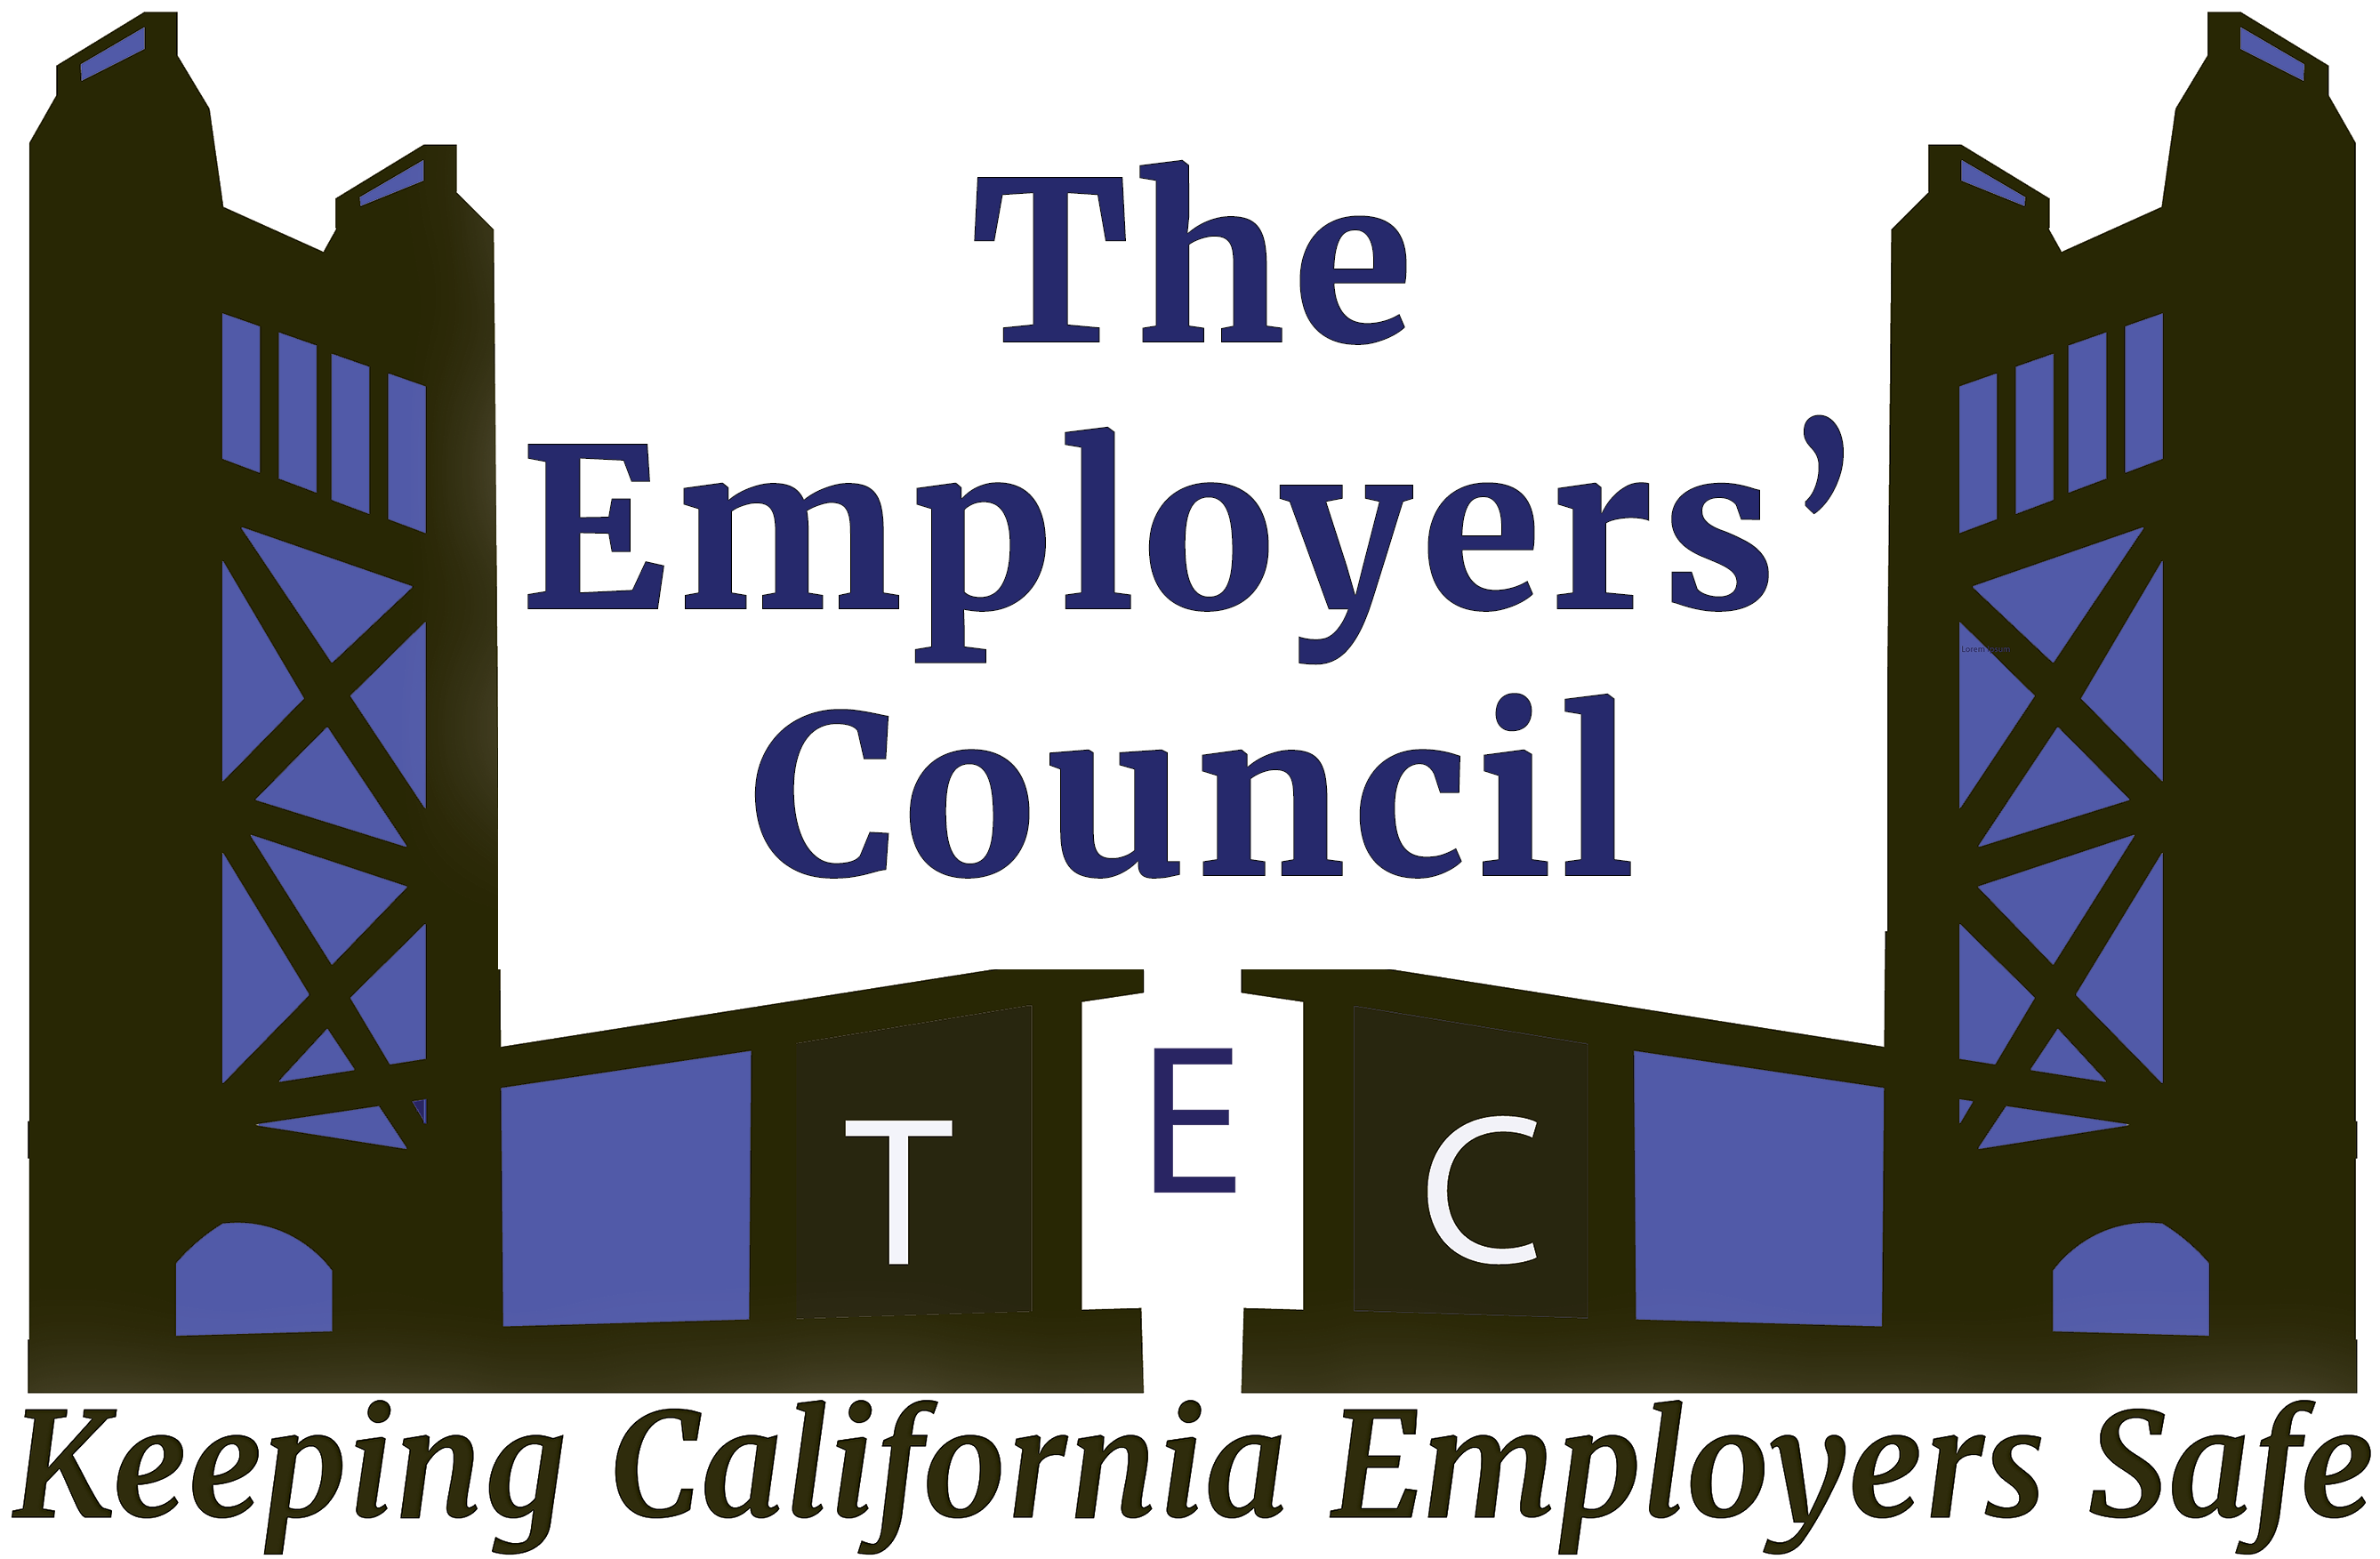 THE EMPLOYERS' COUNCIL